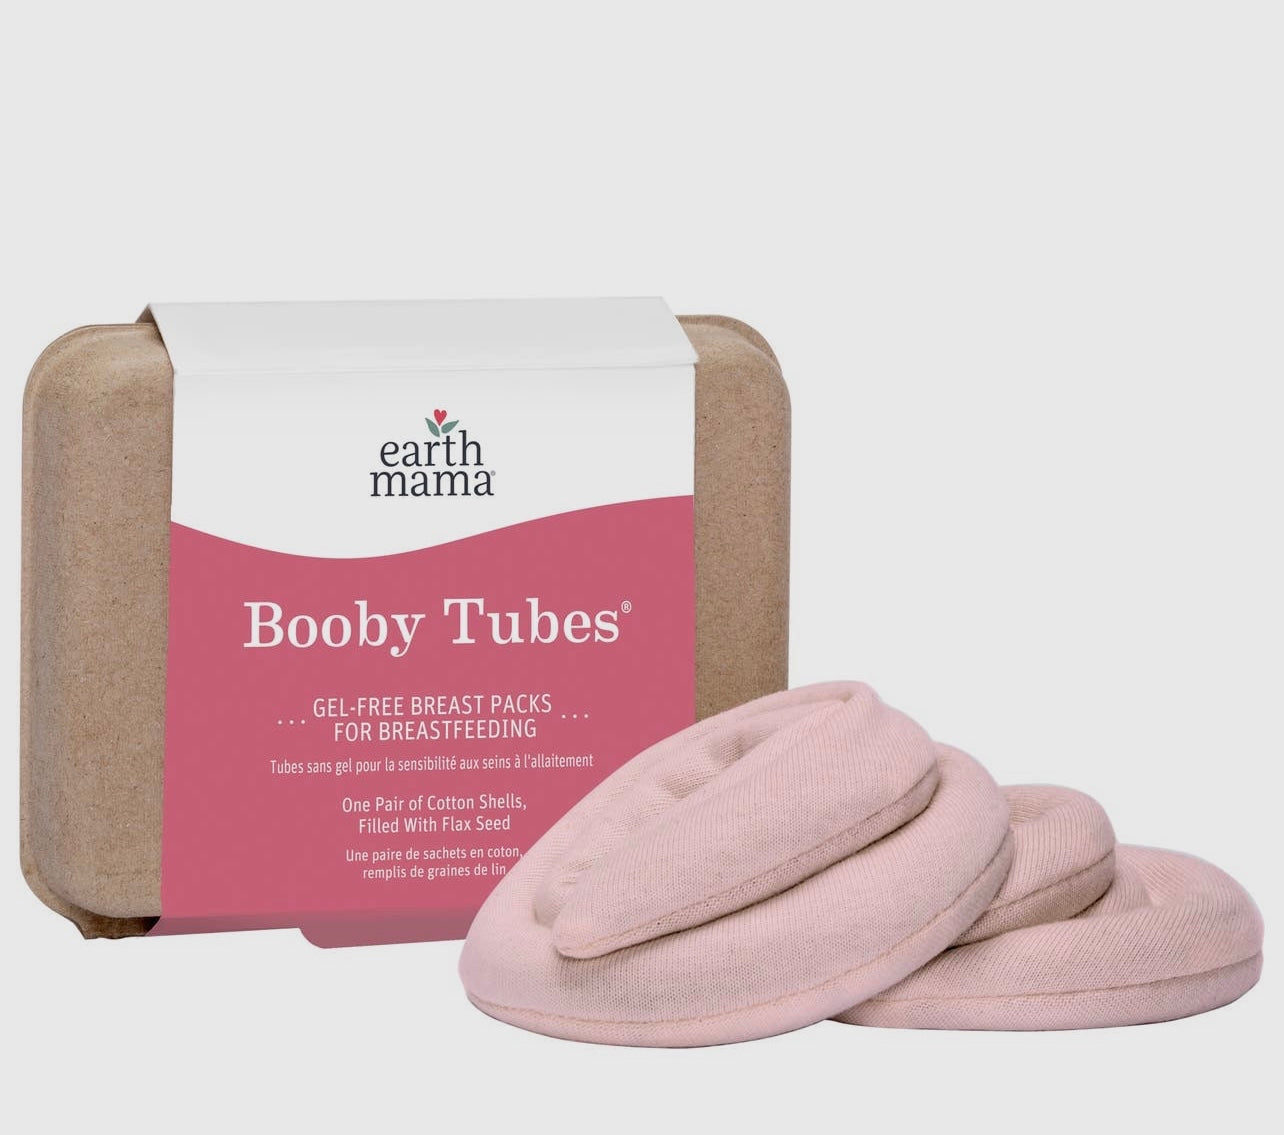 Booby Tubes